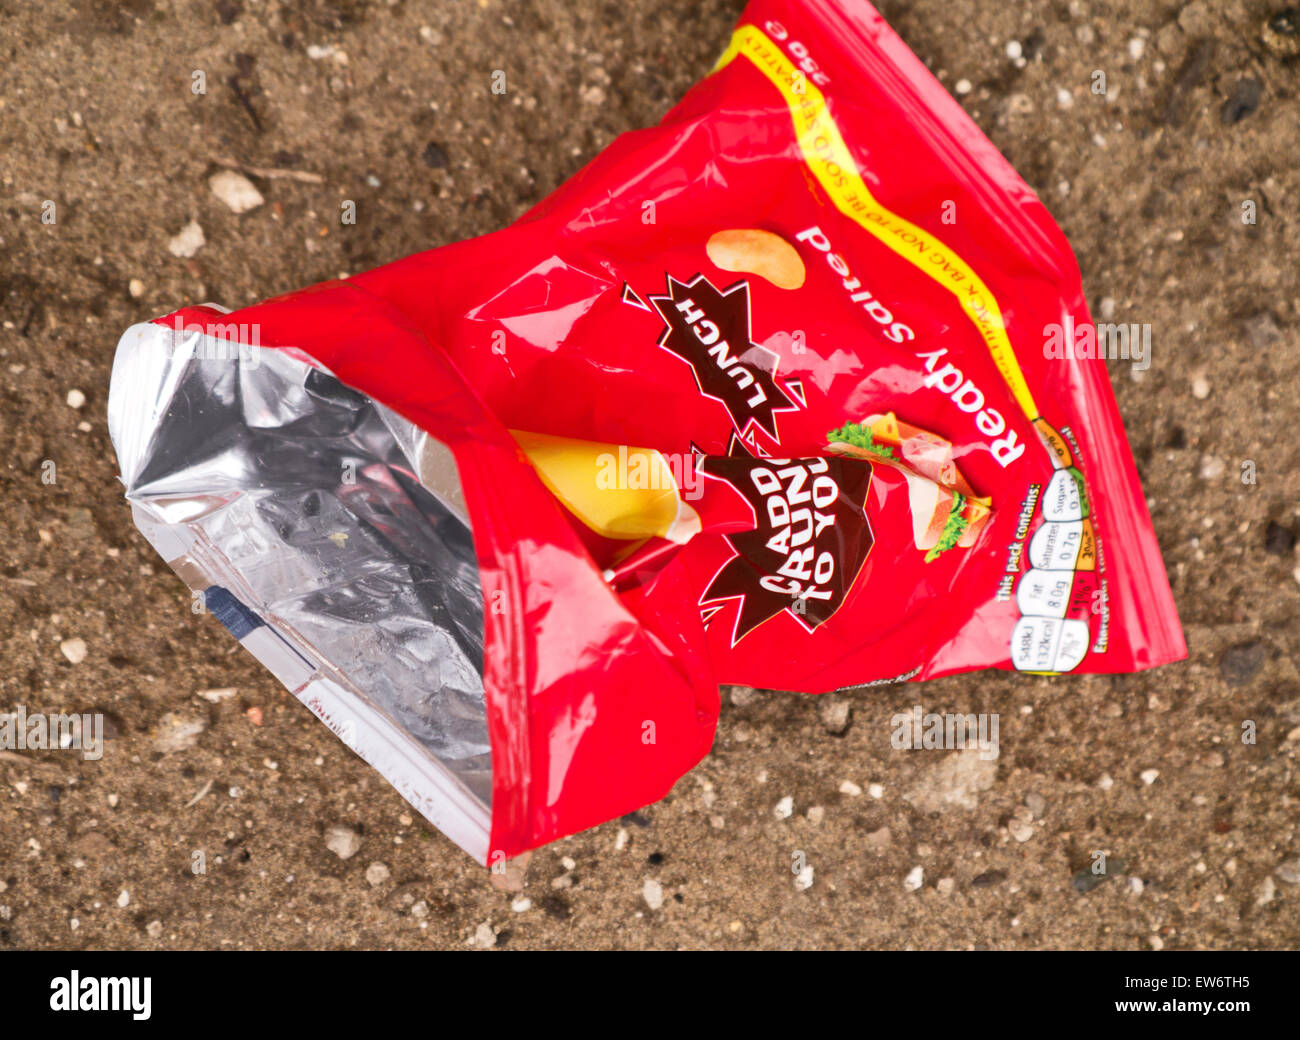 Discarded empty red potato crisps/chips, packet on soil background Stock Photo